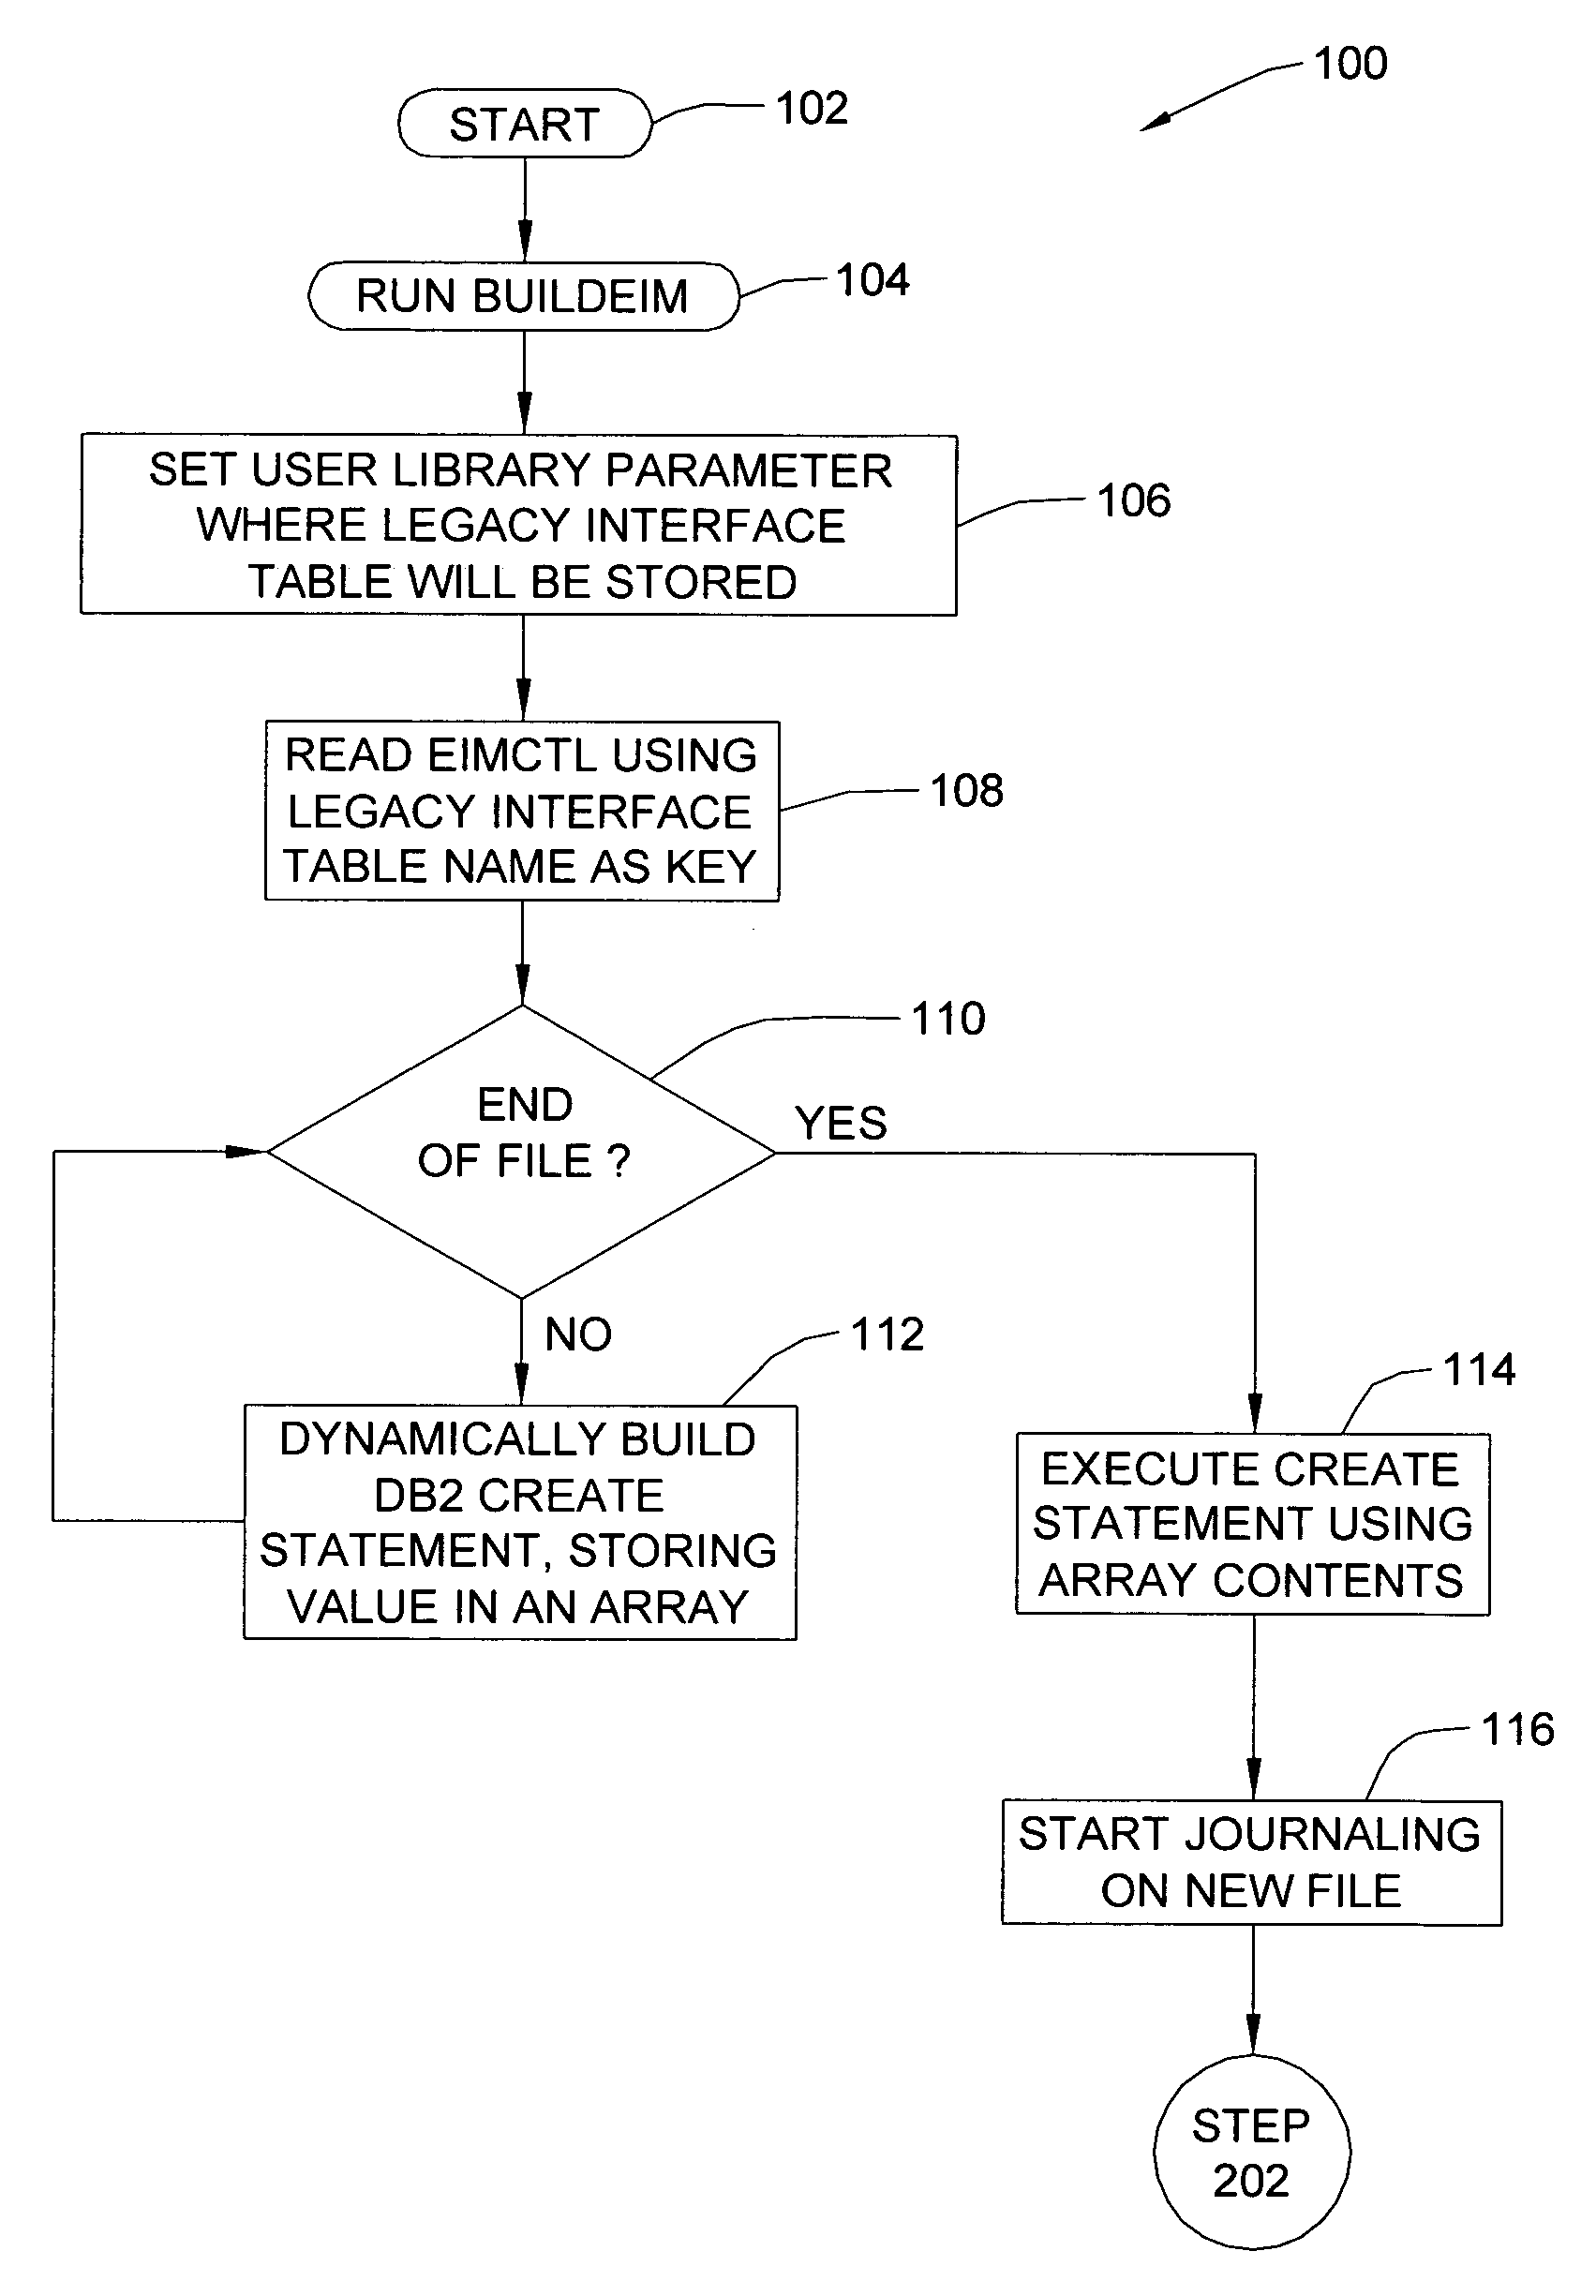 Method and program product for migrating data from a legacy system